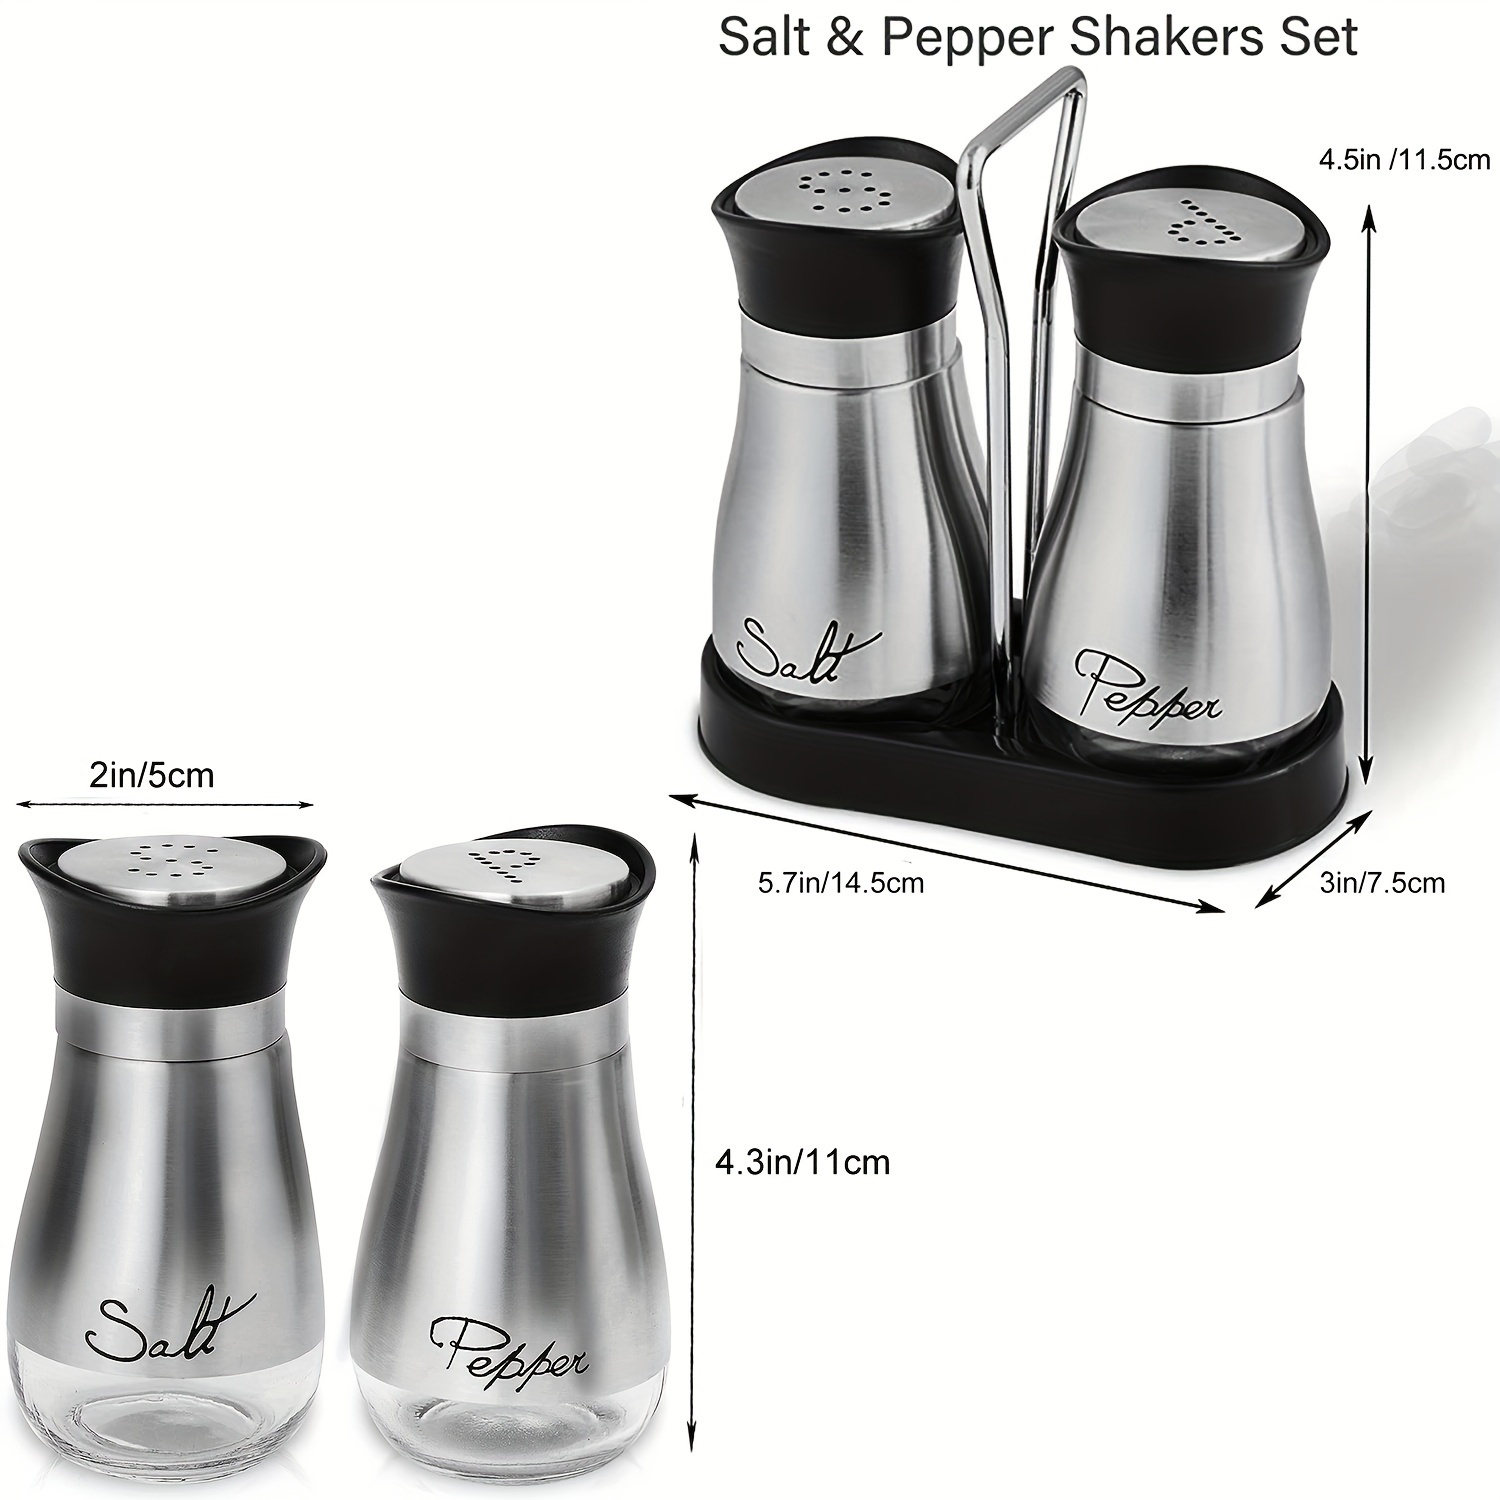 Salt and Pepper Shakers - Spice Dispenser with Adjustable Pour Holes - Stainless Steel & Glass - by Smart House Inc (2, Black)